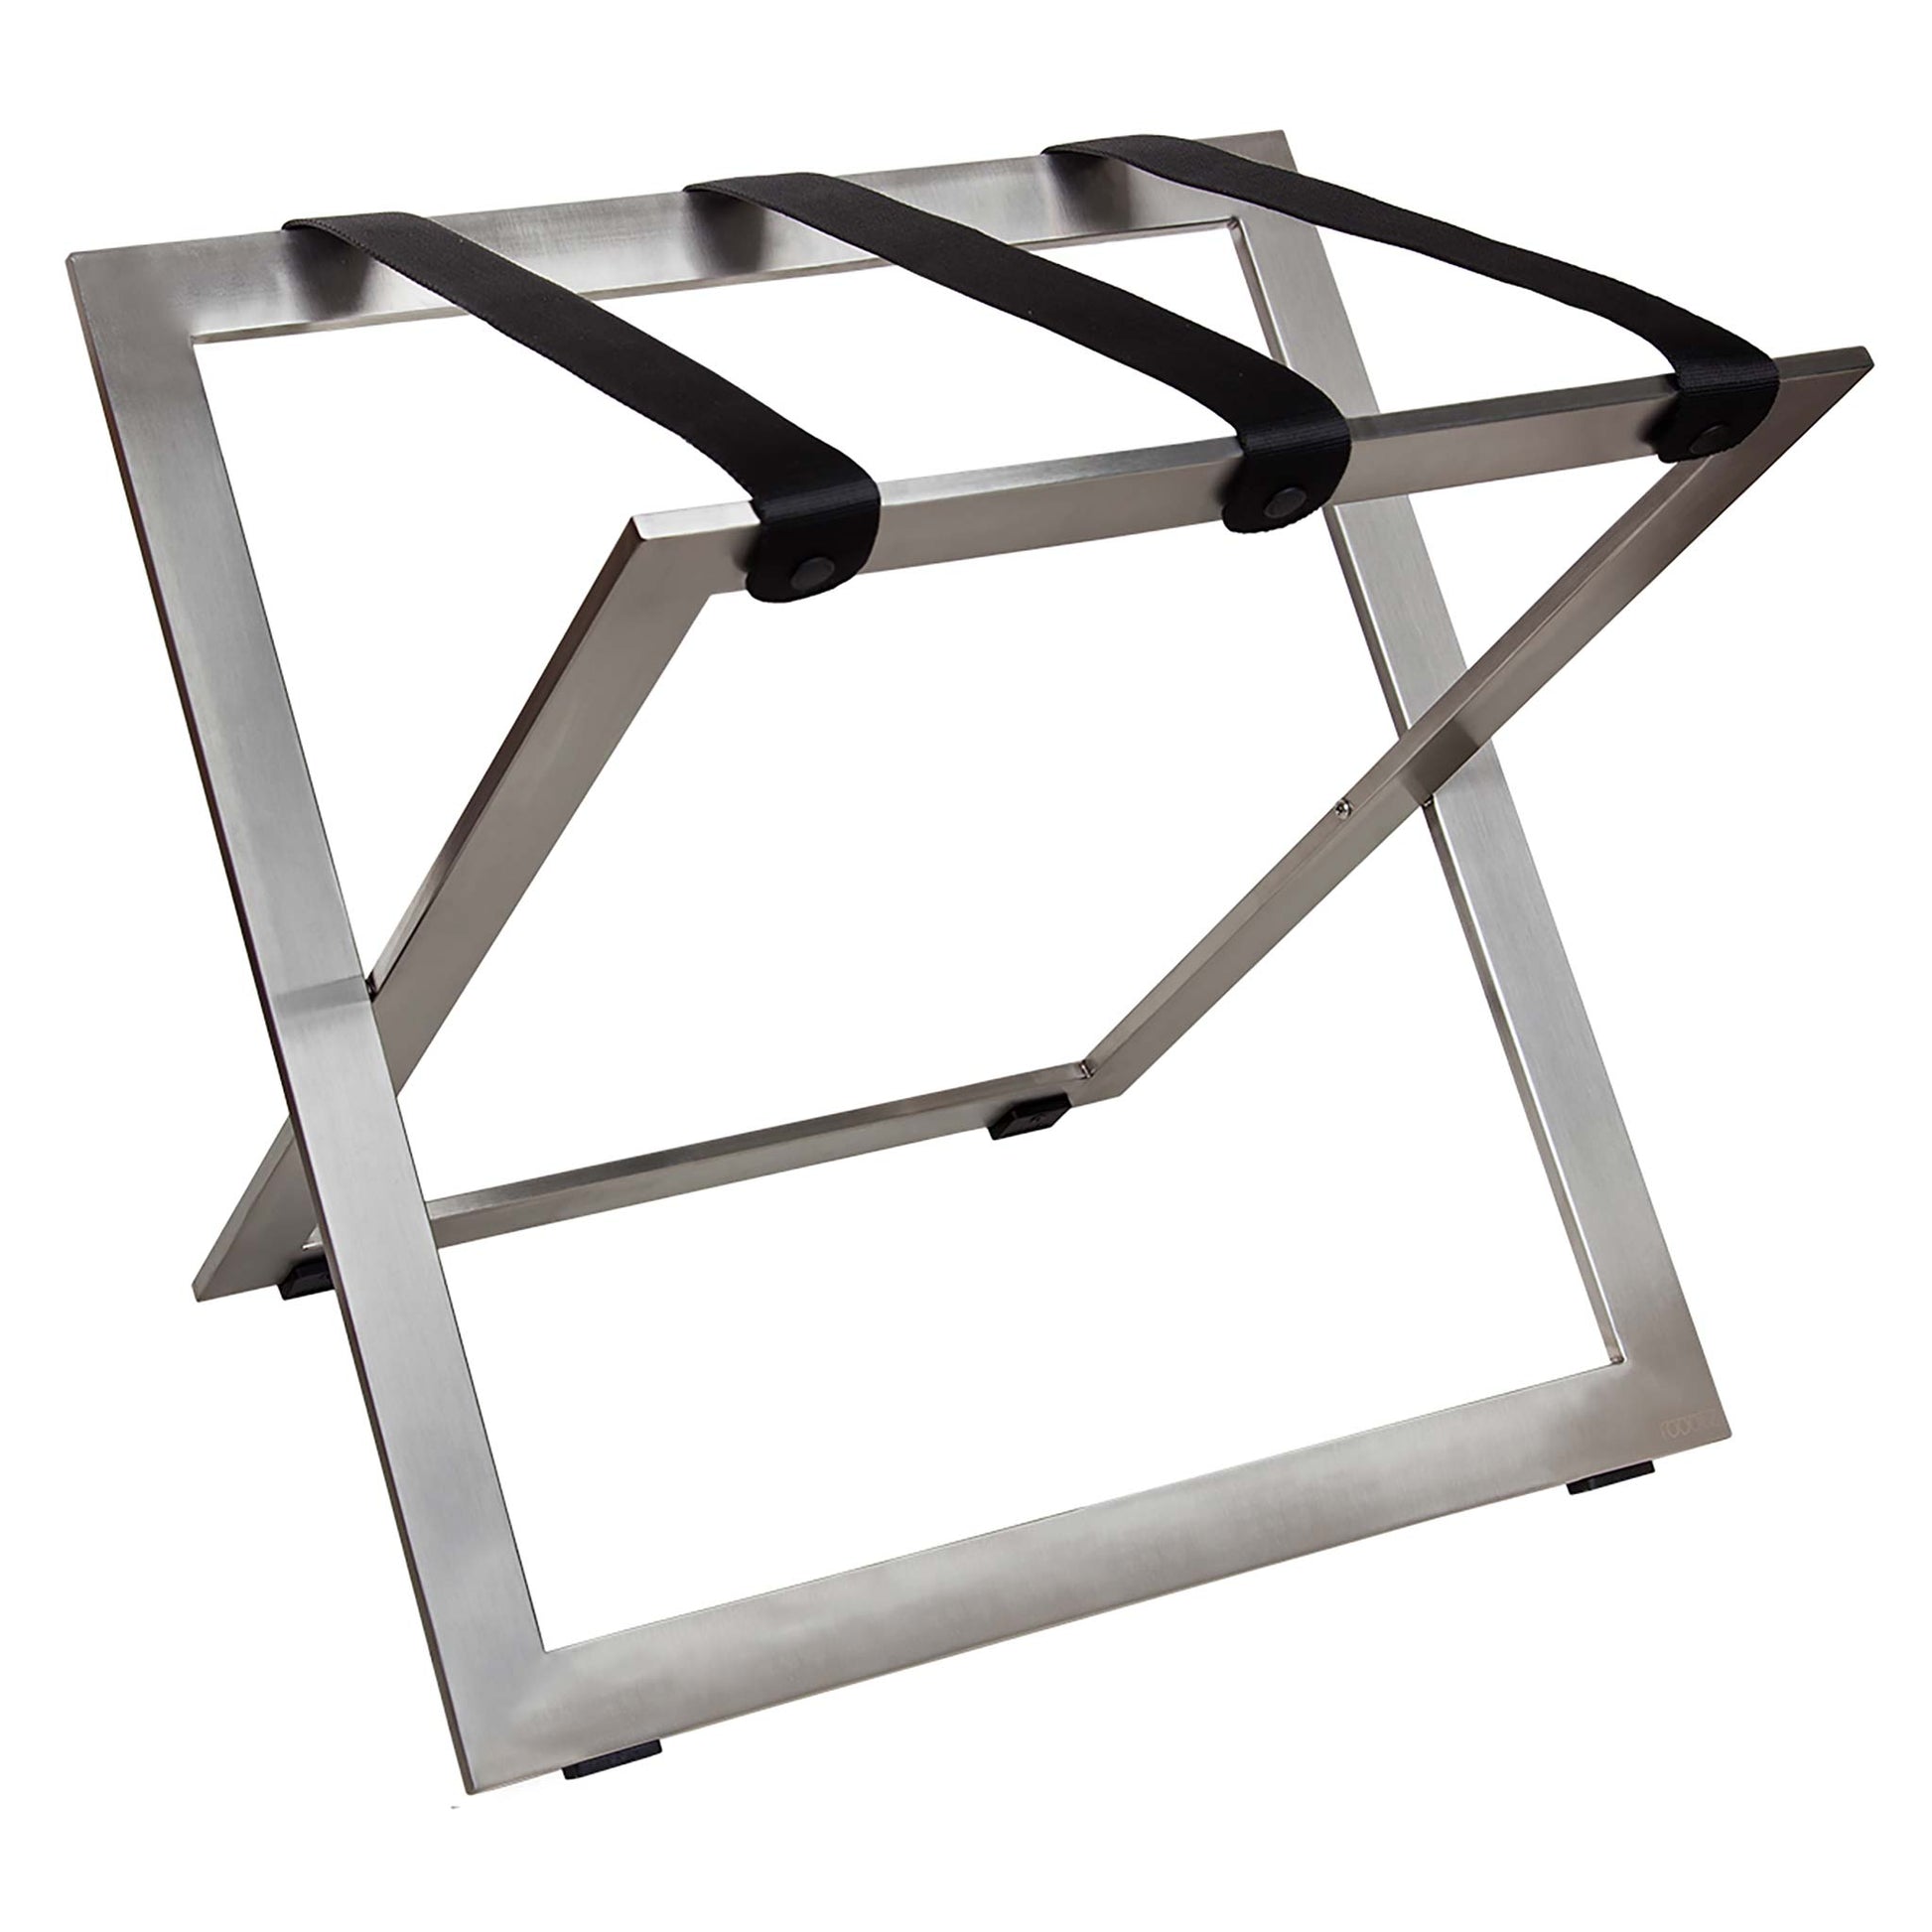 Roootz stainless steel compact hotel luggage rack with black leather straps